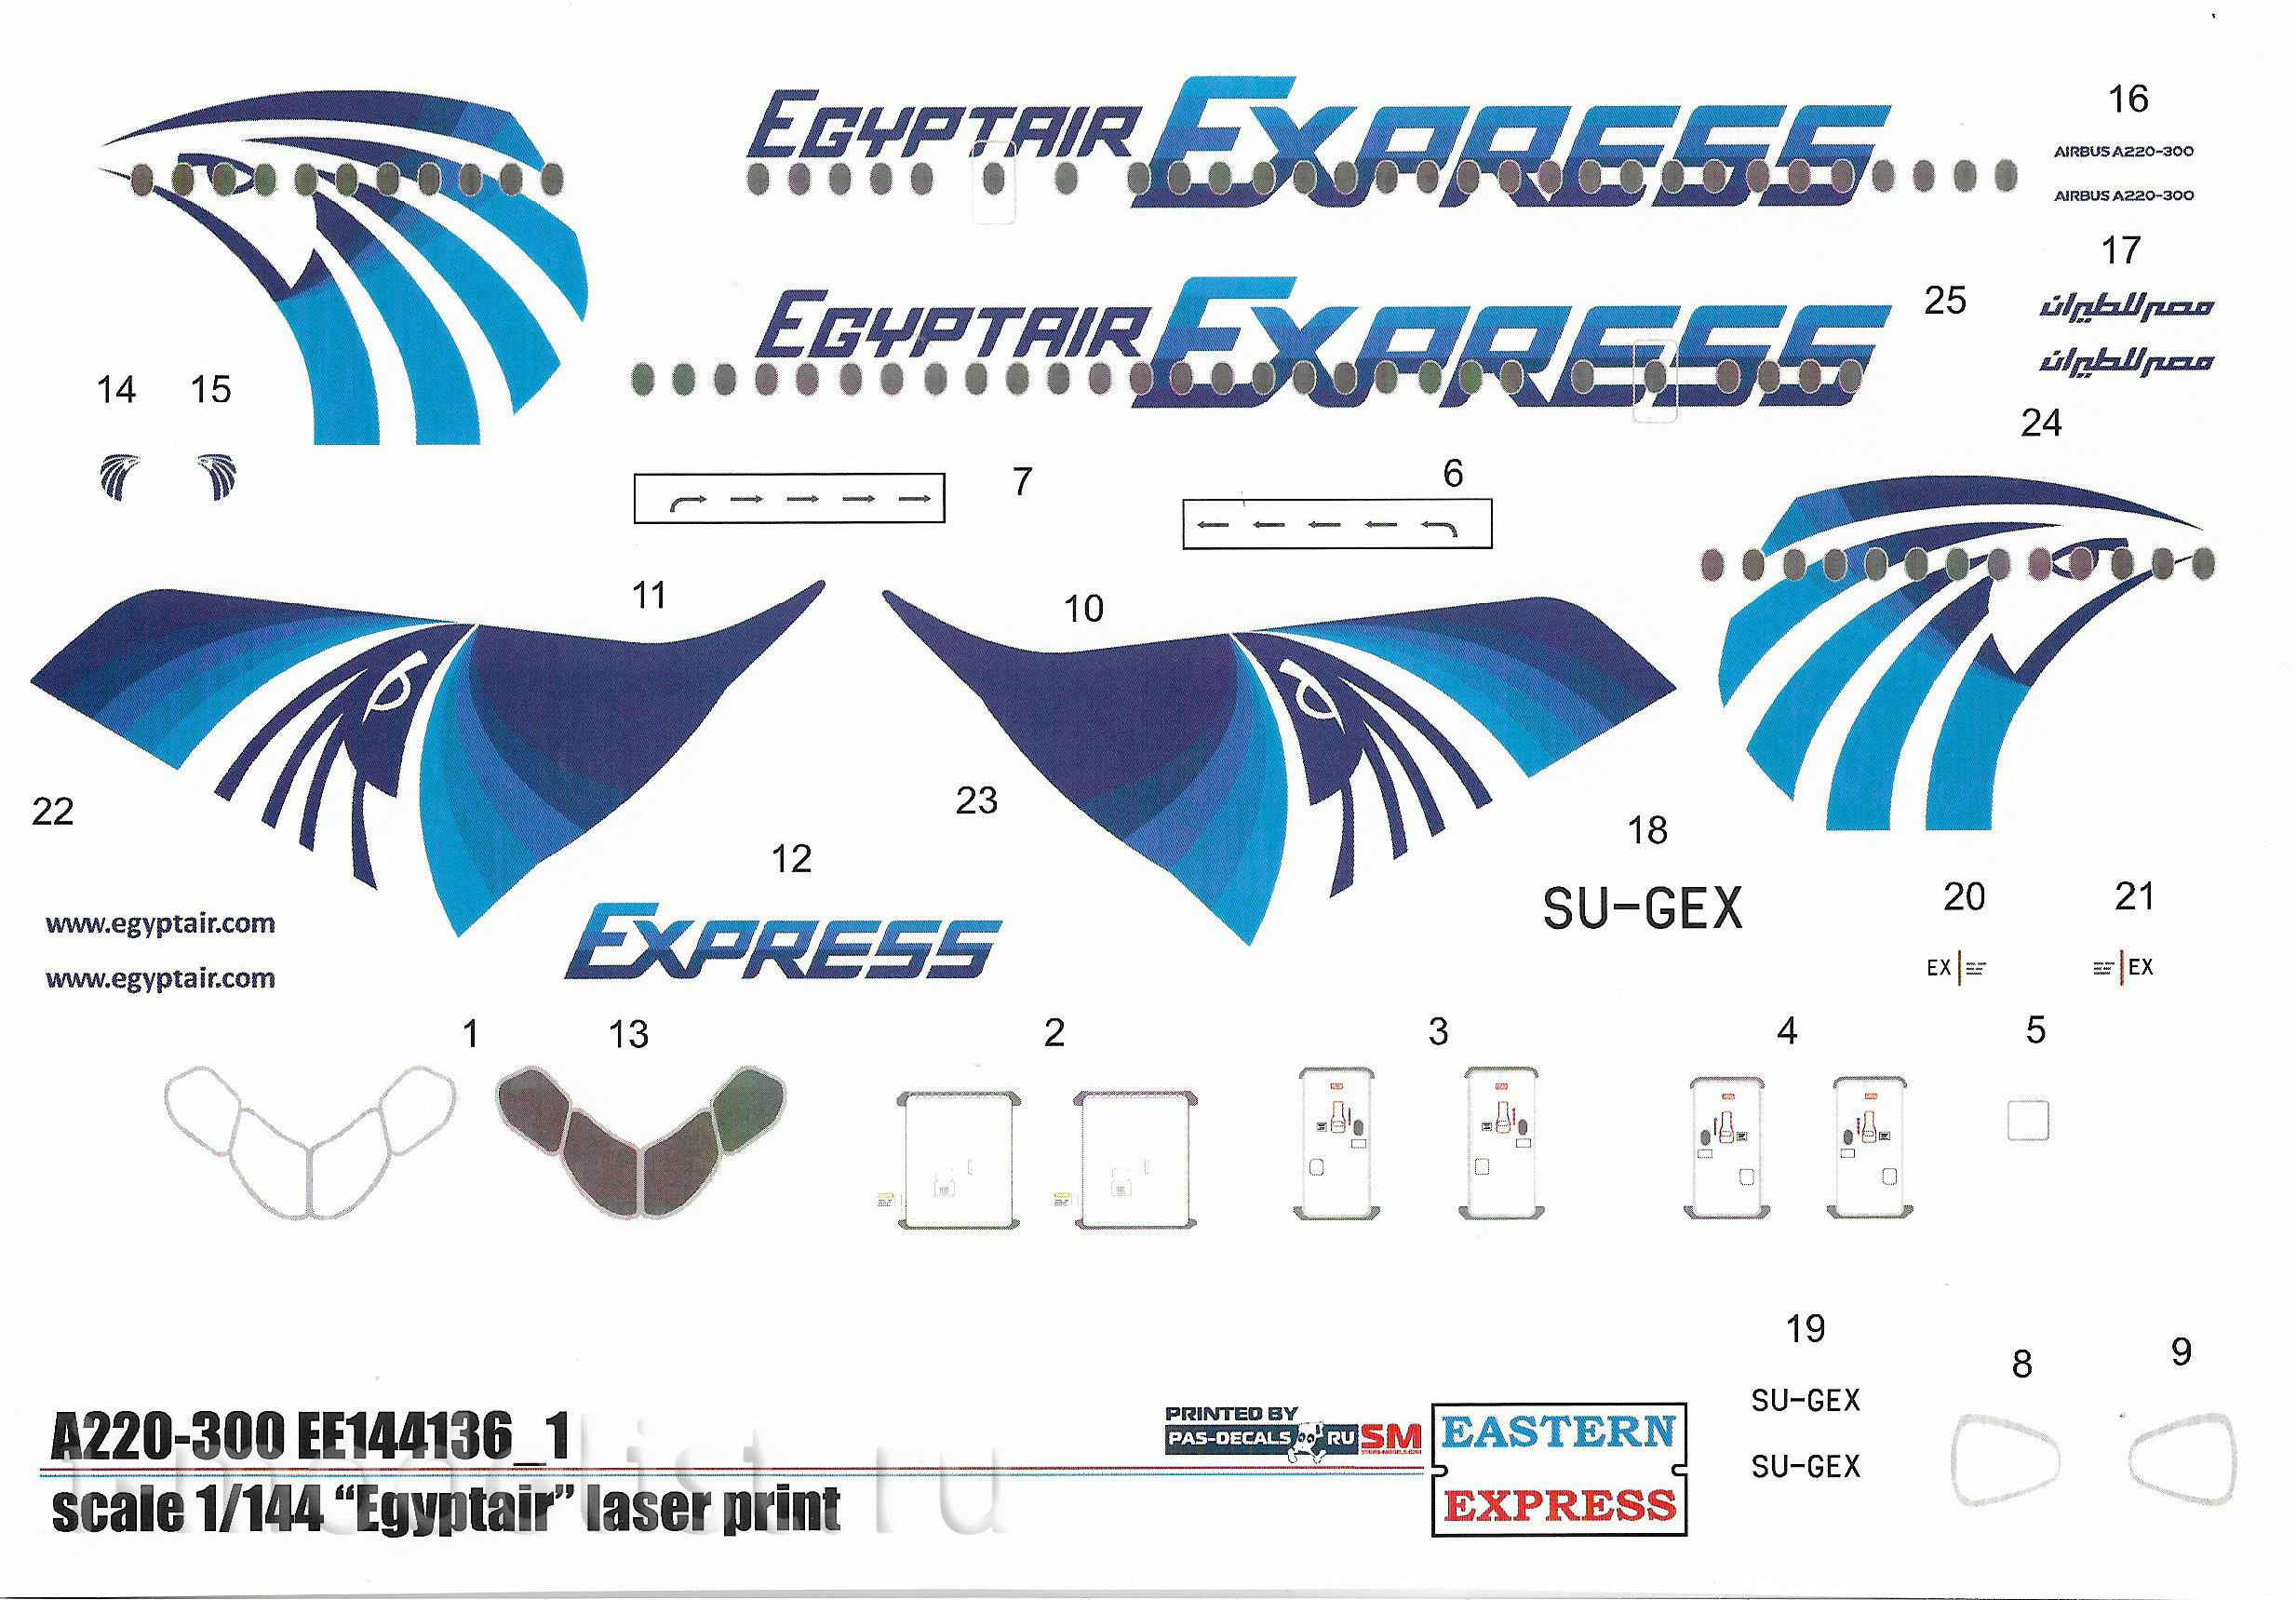 144136-1 Orient Express 1/144 Egyptair a220-300 Airliner (Limited Edition )